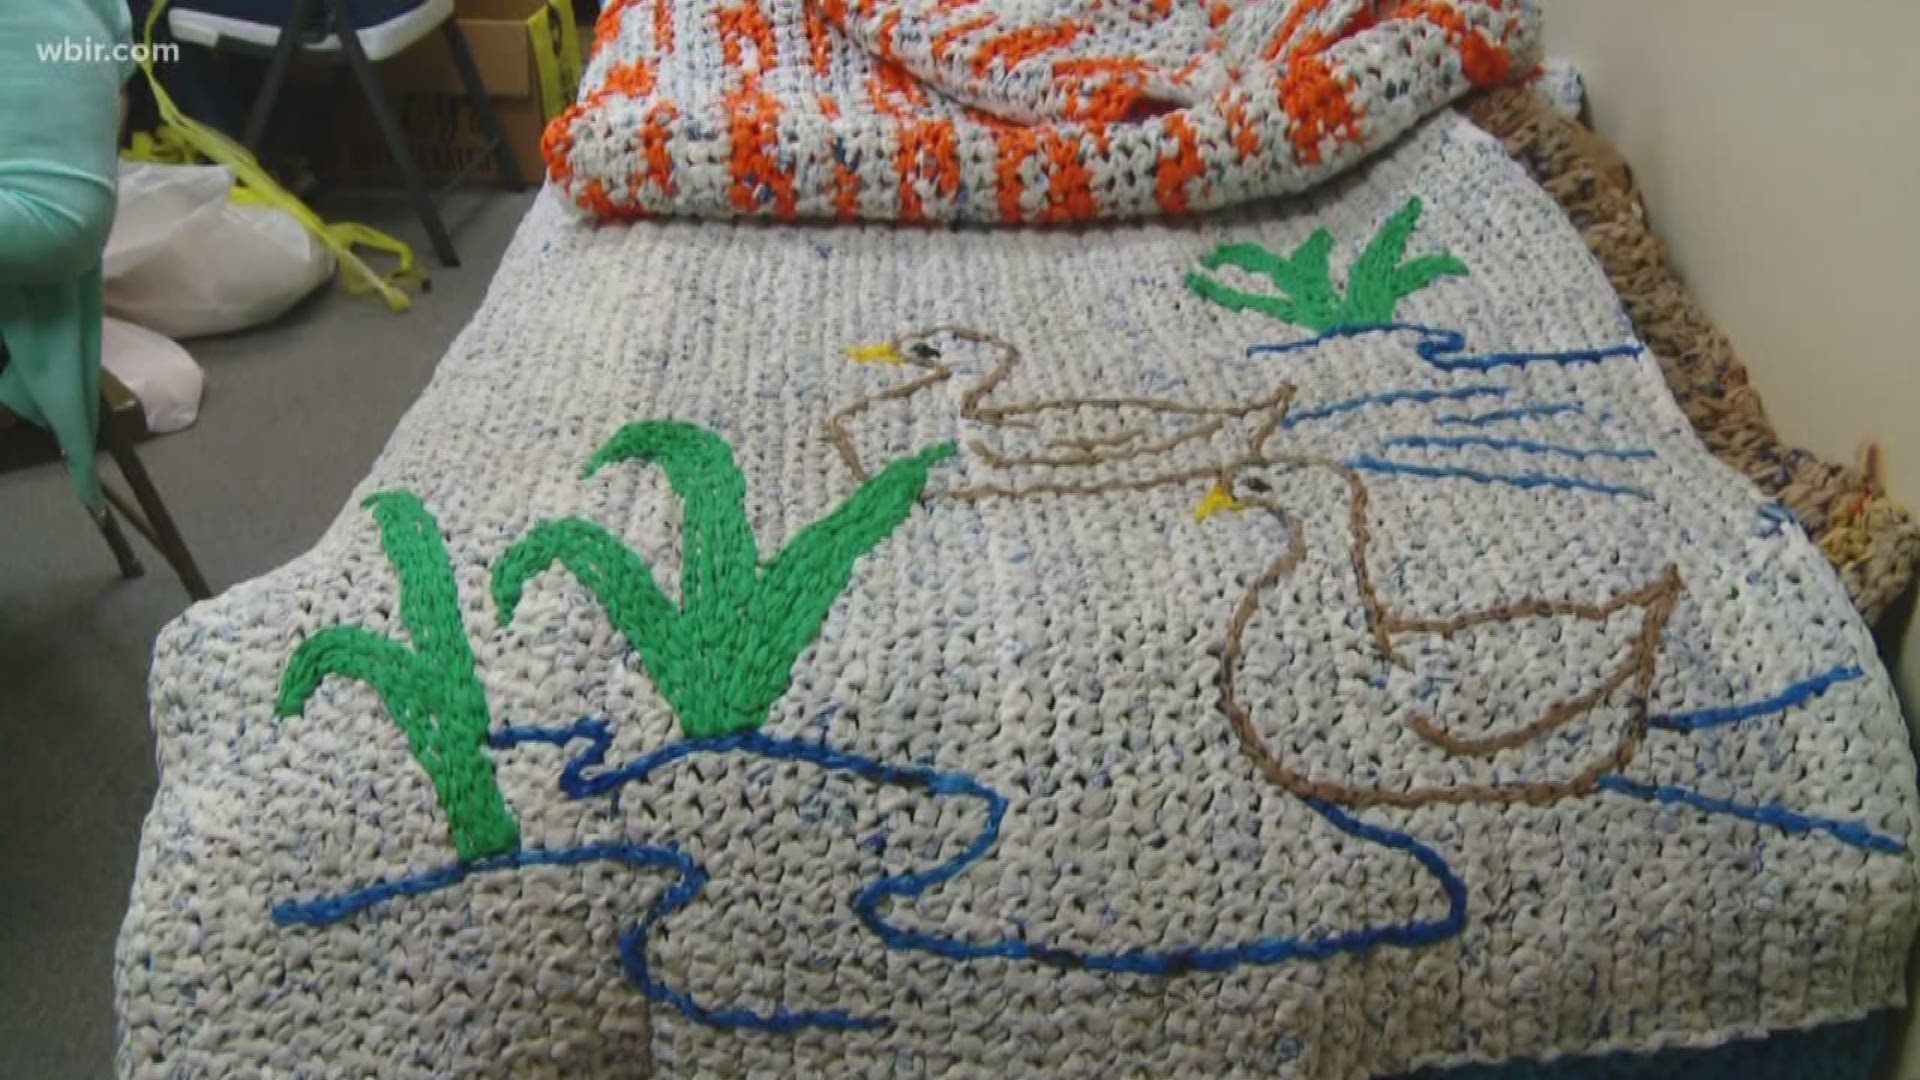 When a group of women read a magazine article about making sleeping mats out of grocery bags -- they turned the idea into a ministry.